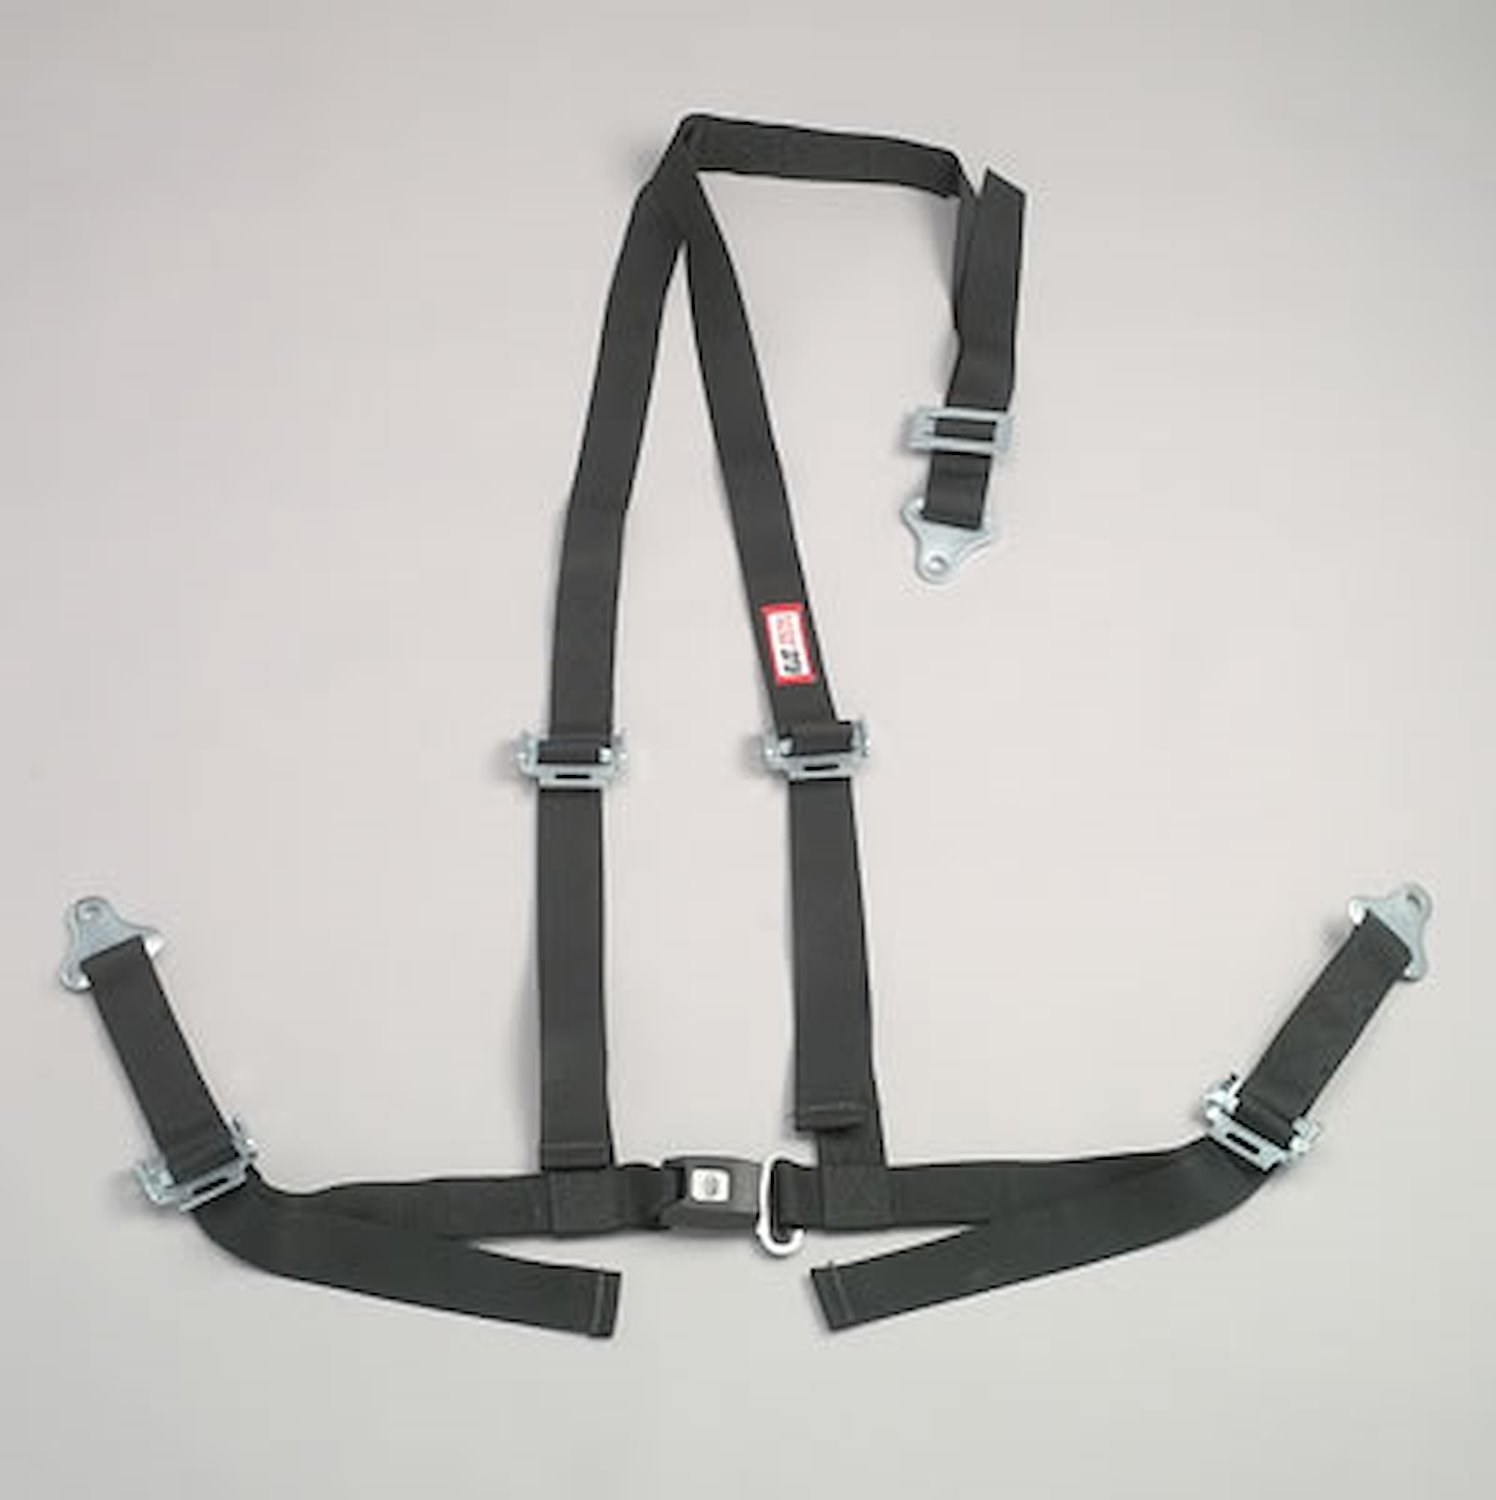 NON-SFI B&T HARNESS 2 PULL UP Lap Belt SNAP 2 S. H. Individual FLOOR Mount WRAP/SNAP w/STERNUM STRAP GRAY